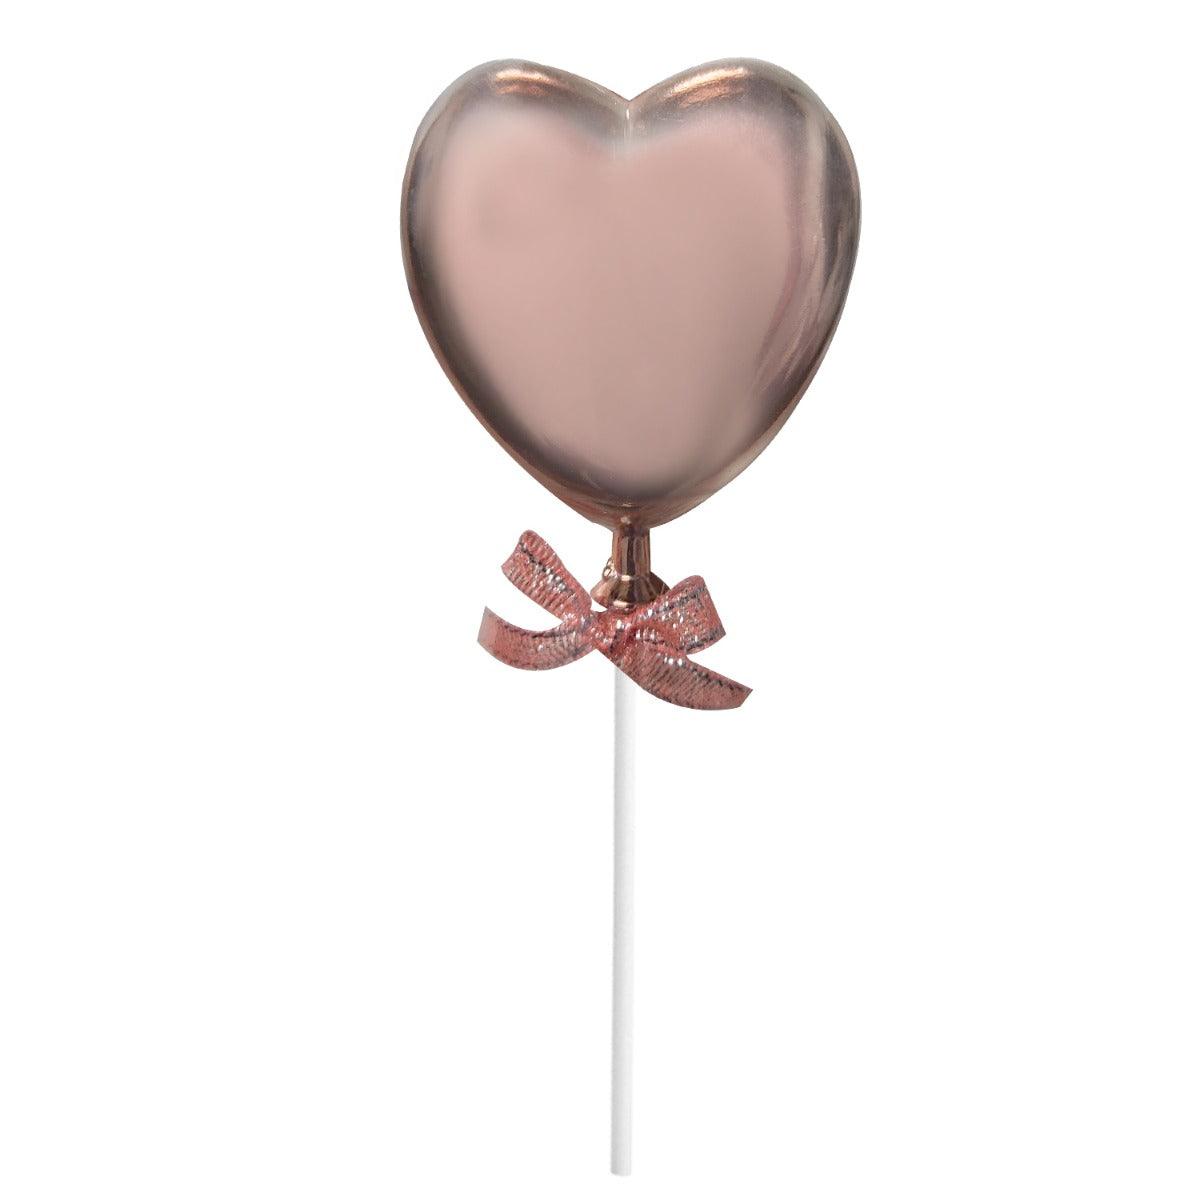 PartyCorp Rose Gold Heart Shaped Cake Topper, 1 Pc